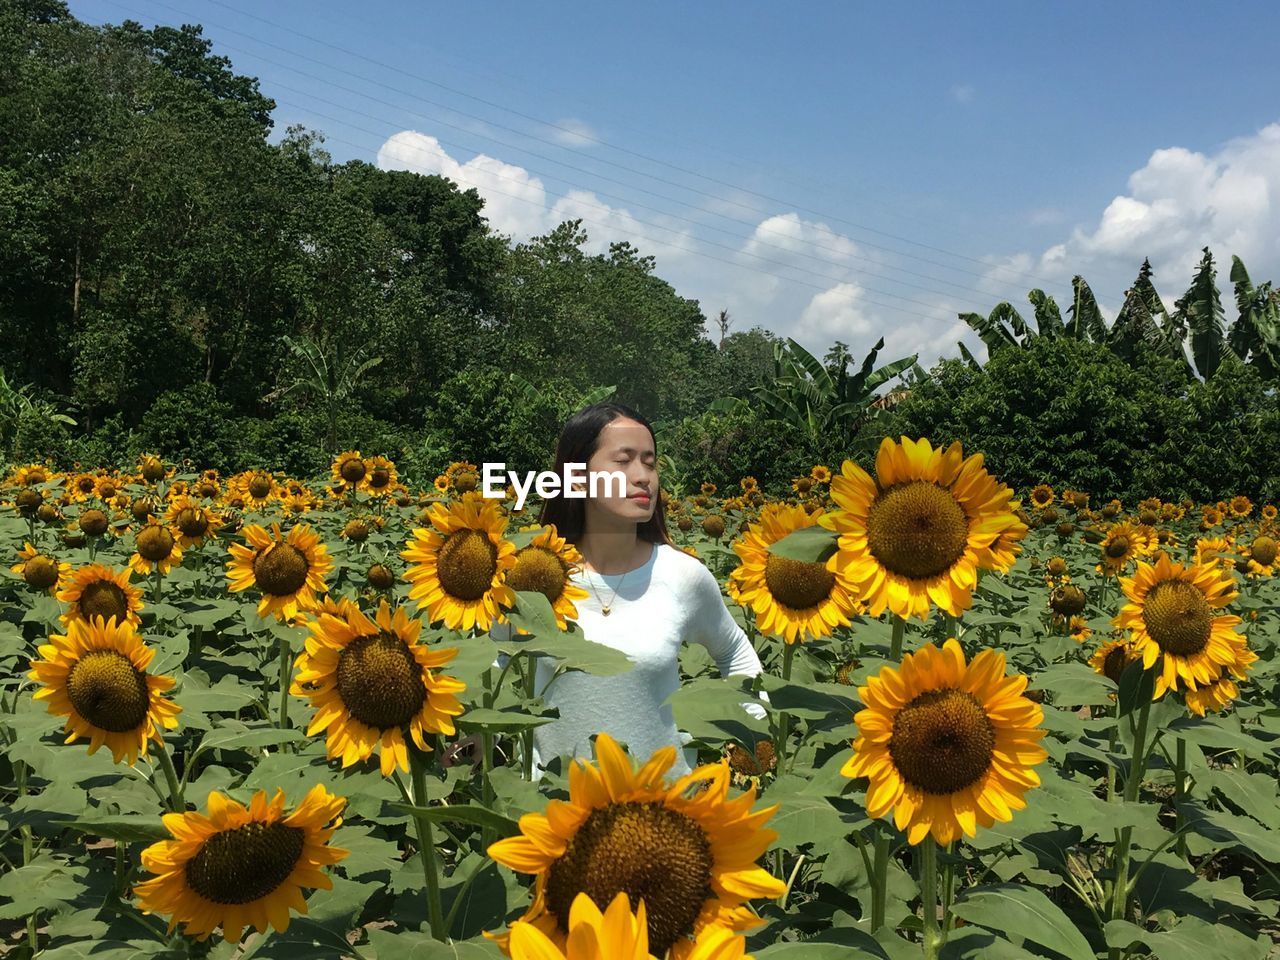 Woman standing amidst blooming sunflowers